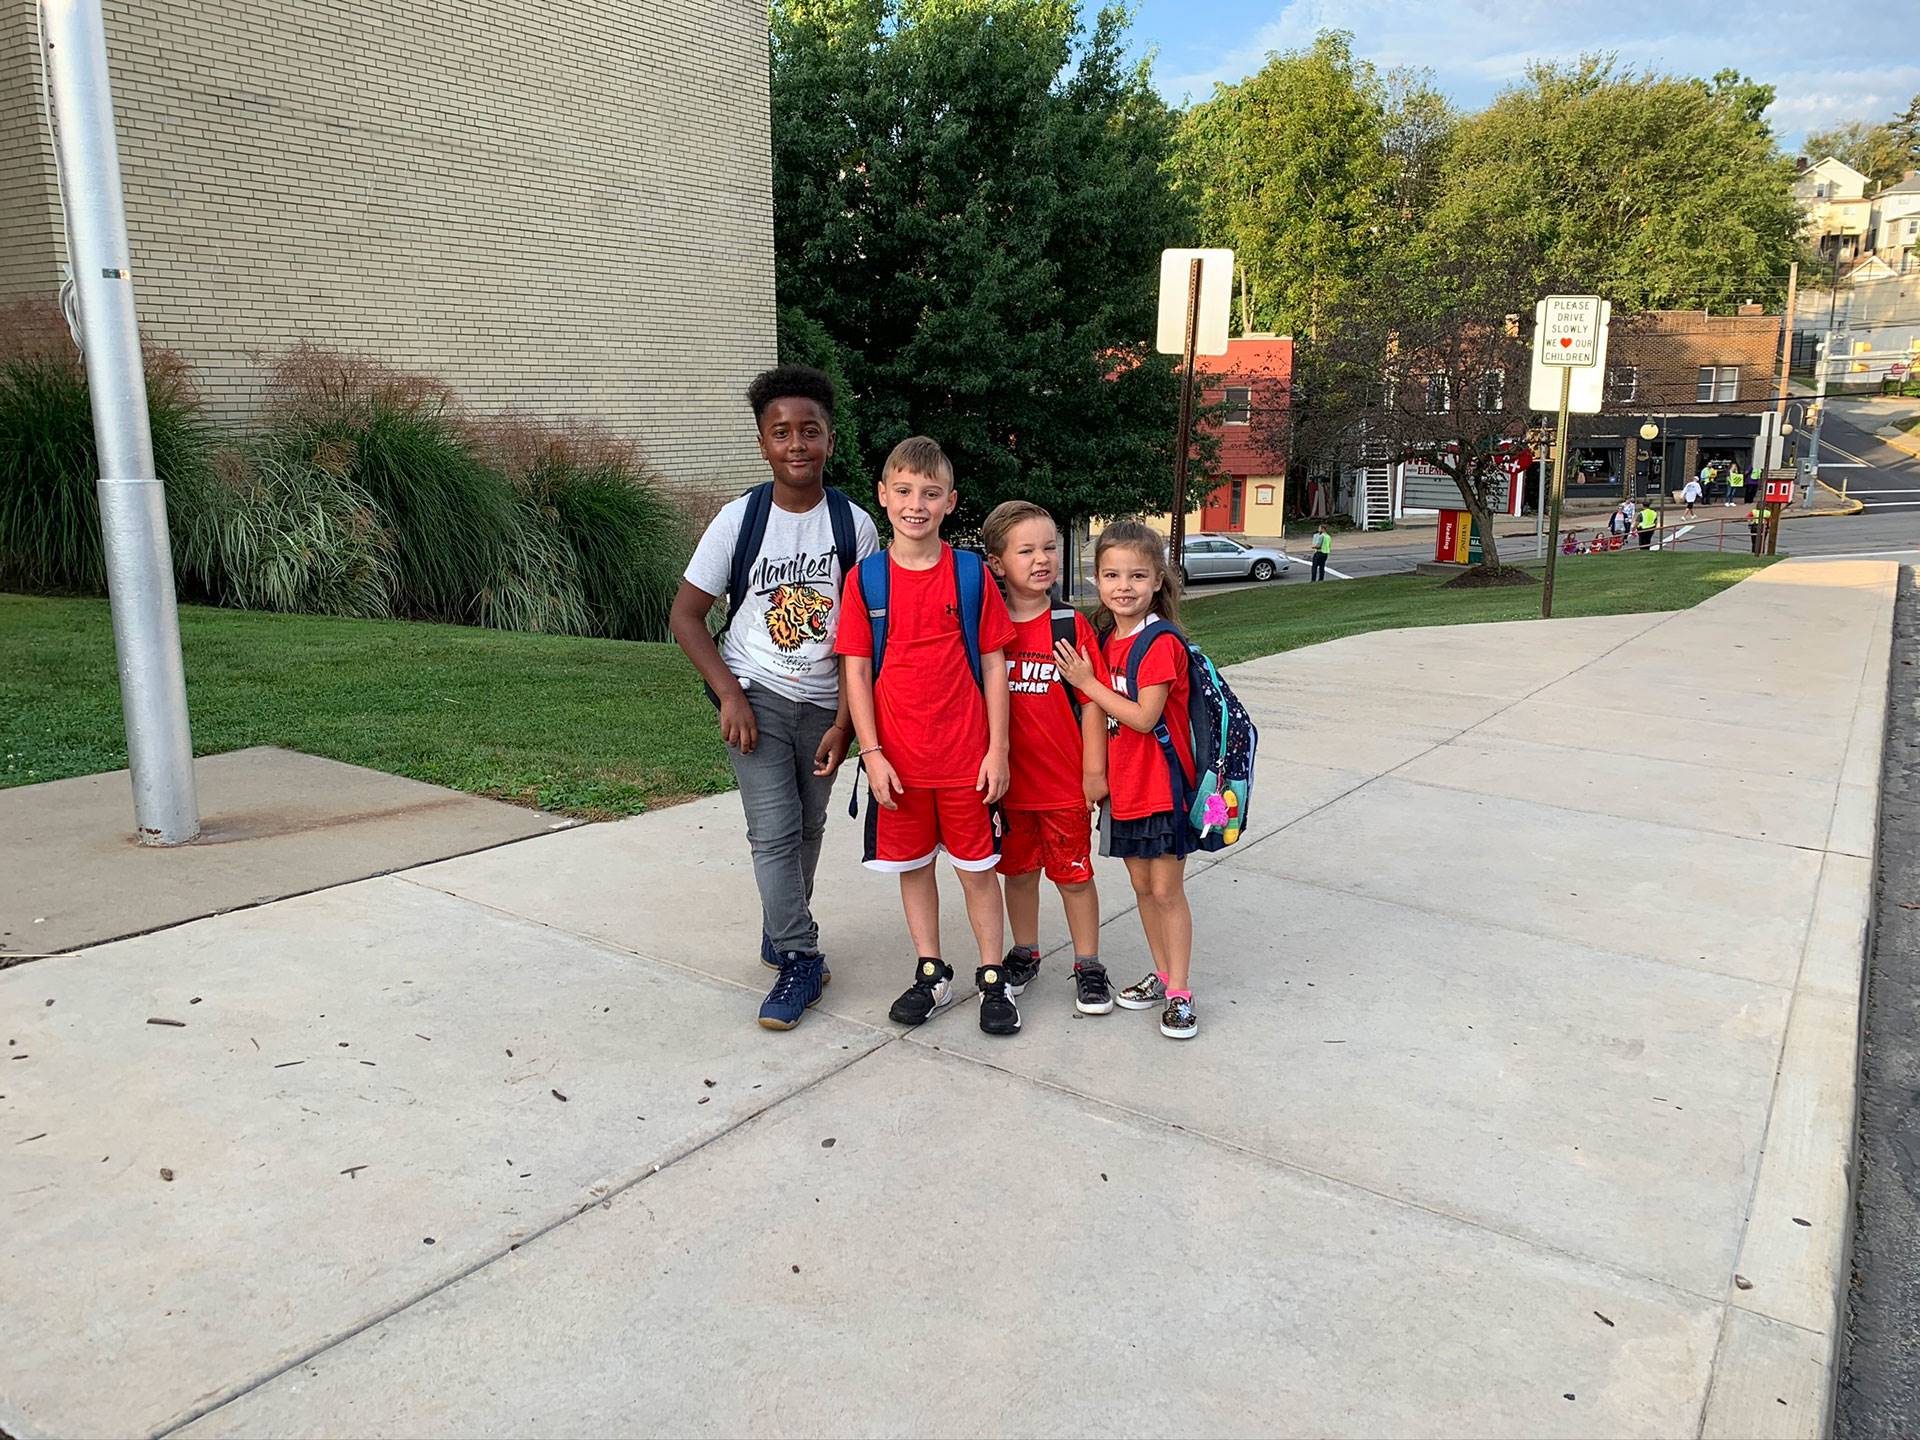 West View students walking to school on International Walk to School Day on Oct. 2, 2019